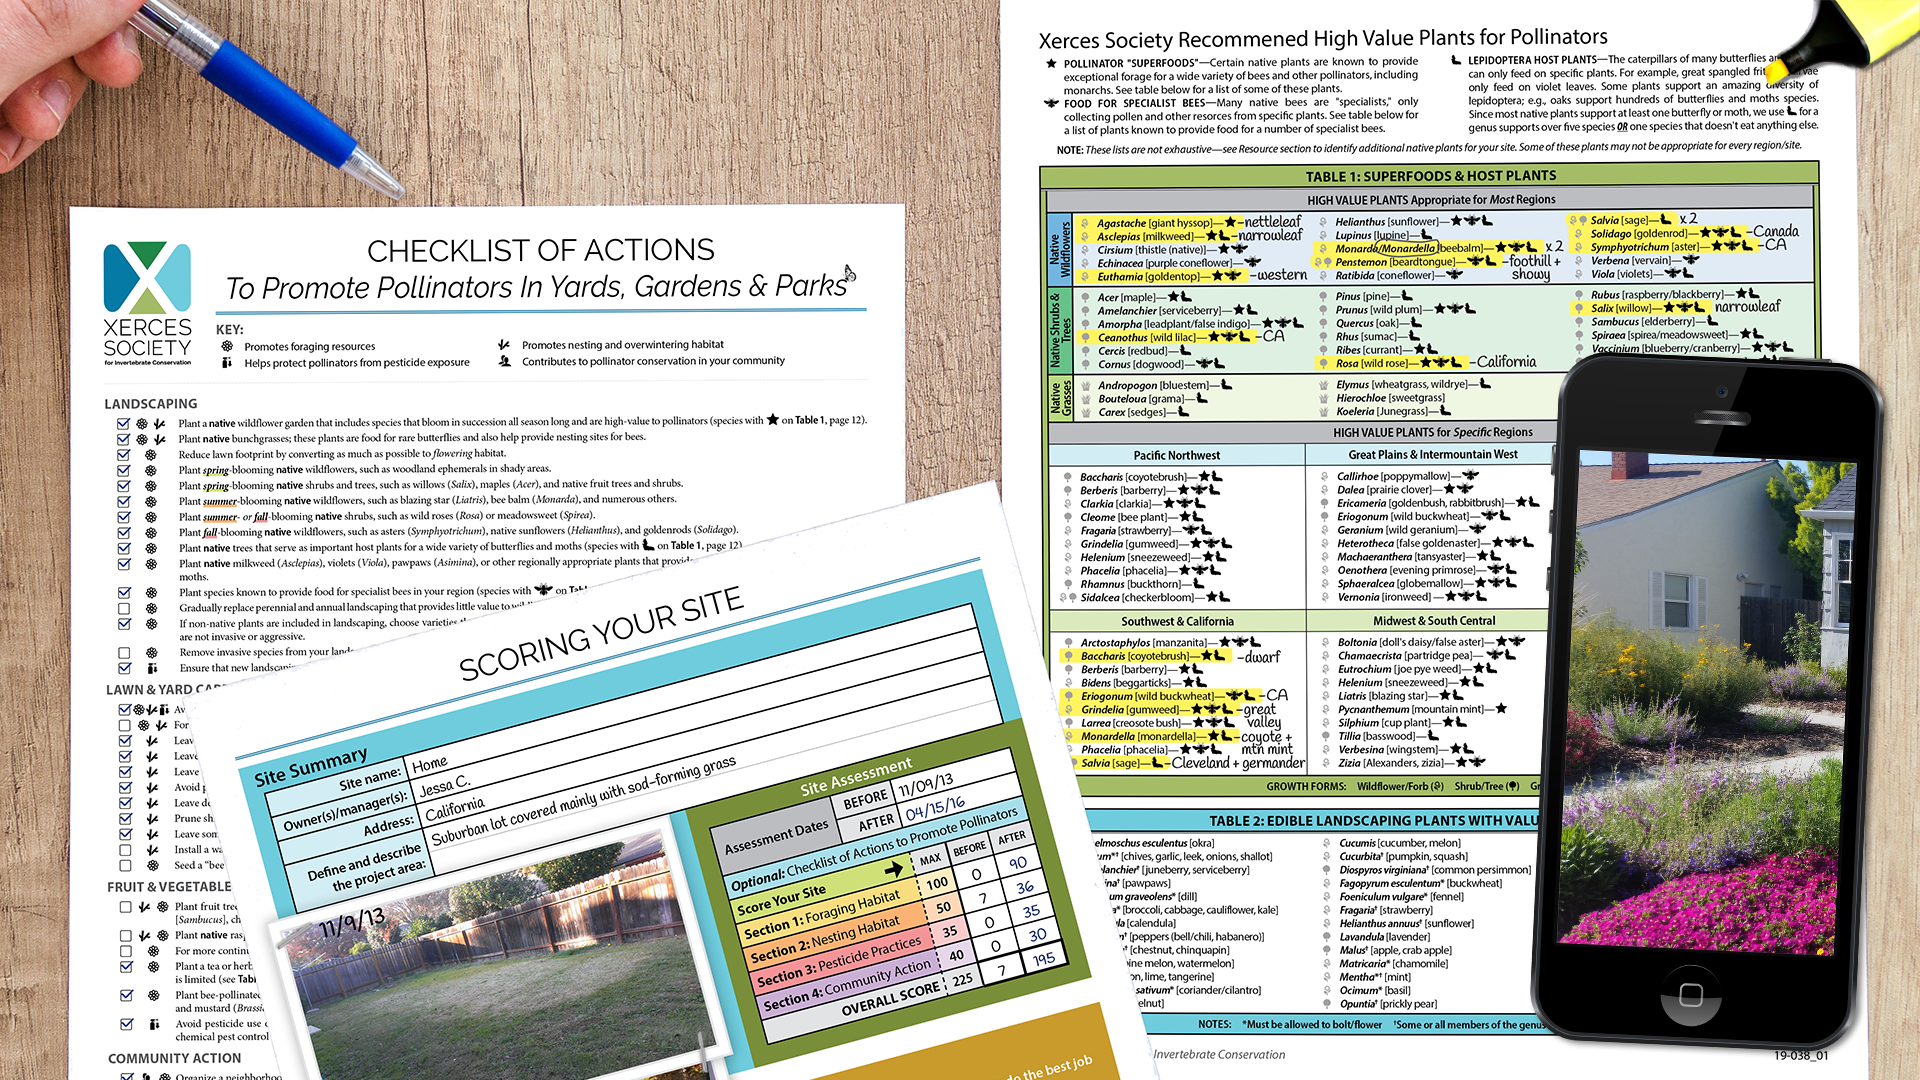 This graphic depicts a Checklist of Actions to Promote Pollinators in Yards, Gardens, and Parks; a score sheet for your site; a plant list; and a phone displaying a photo of some flowering habitat in front of a small house.